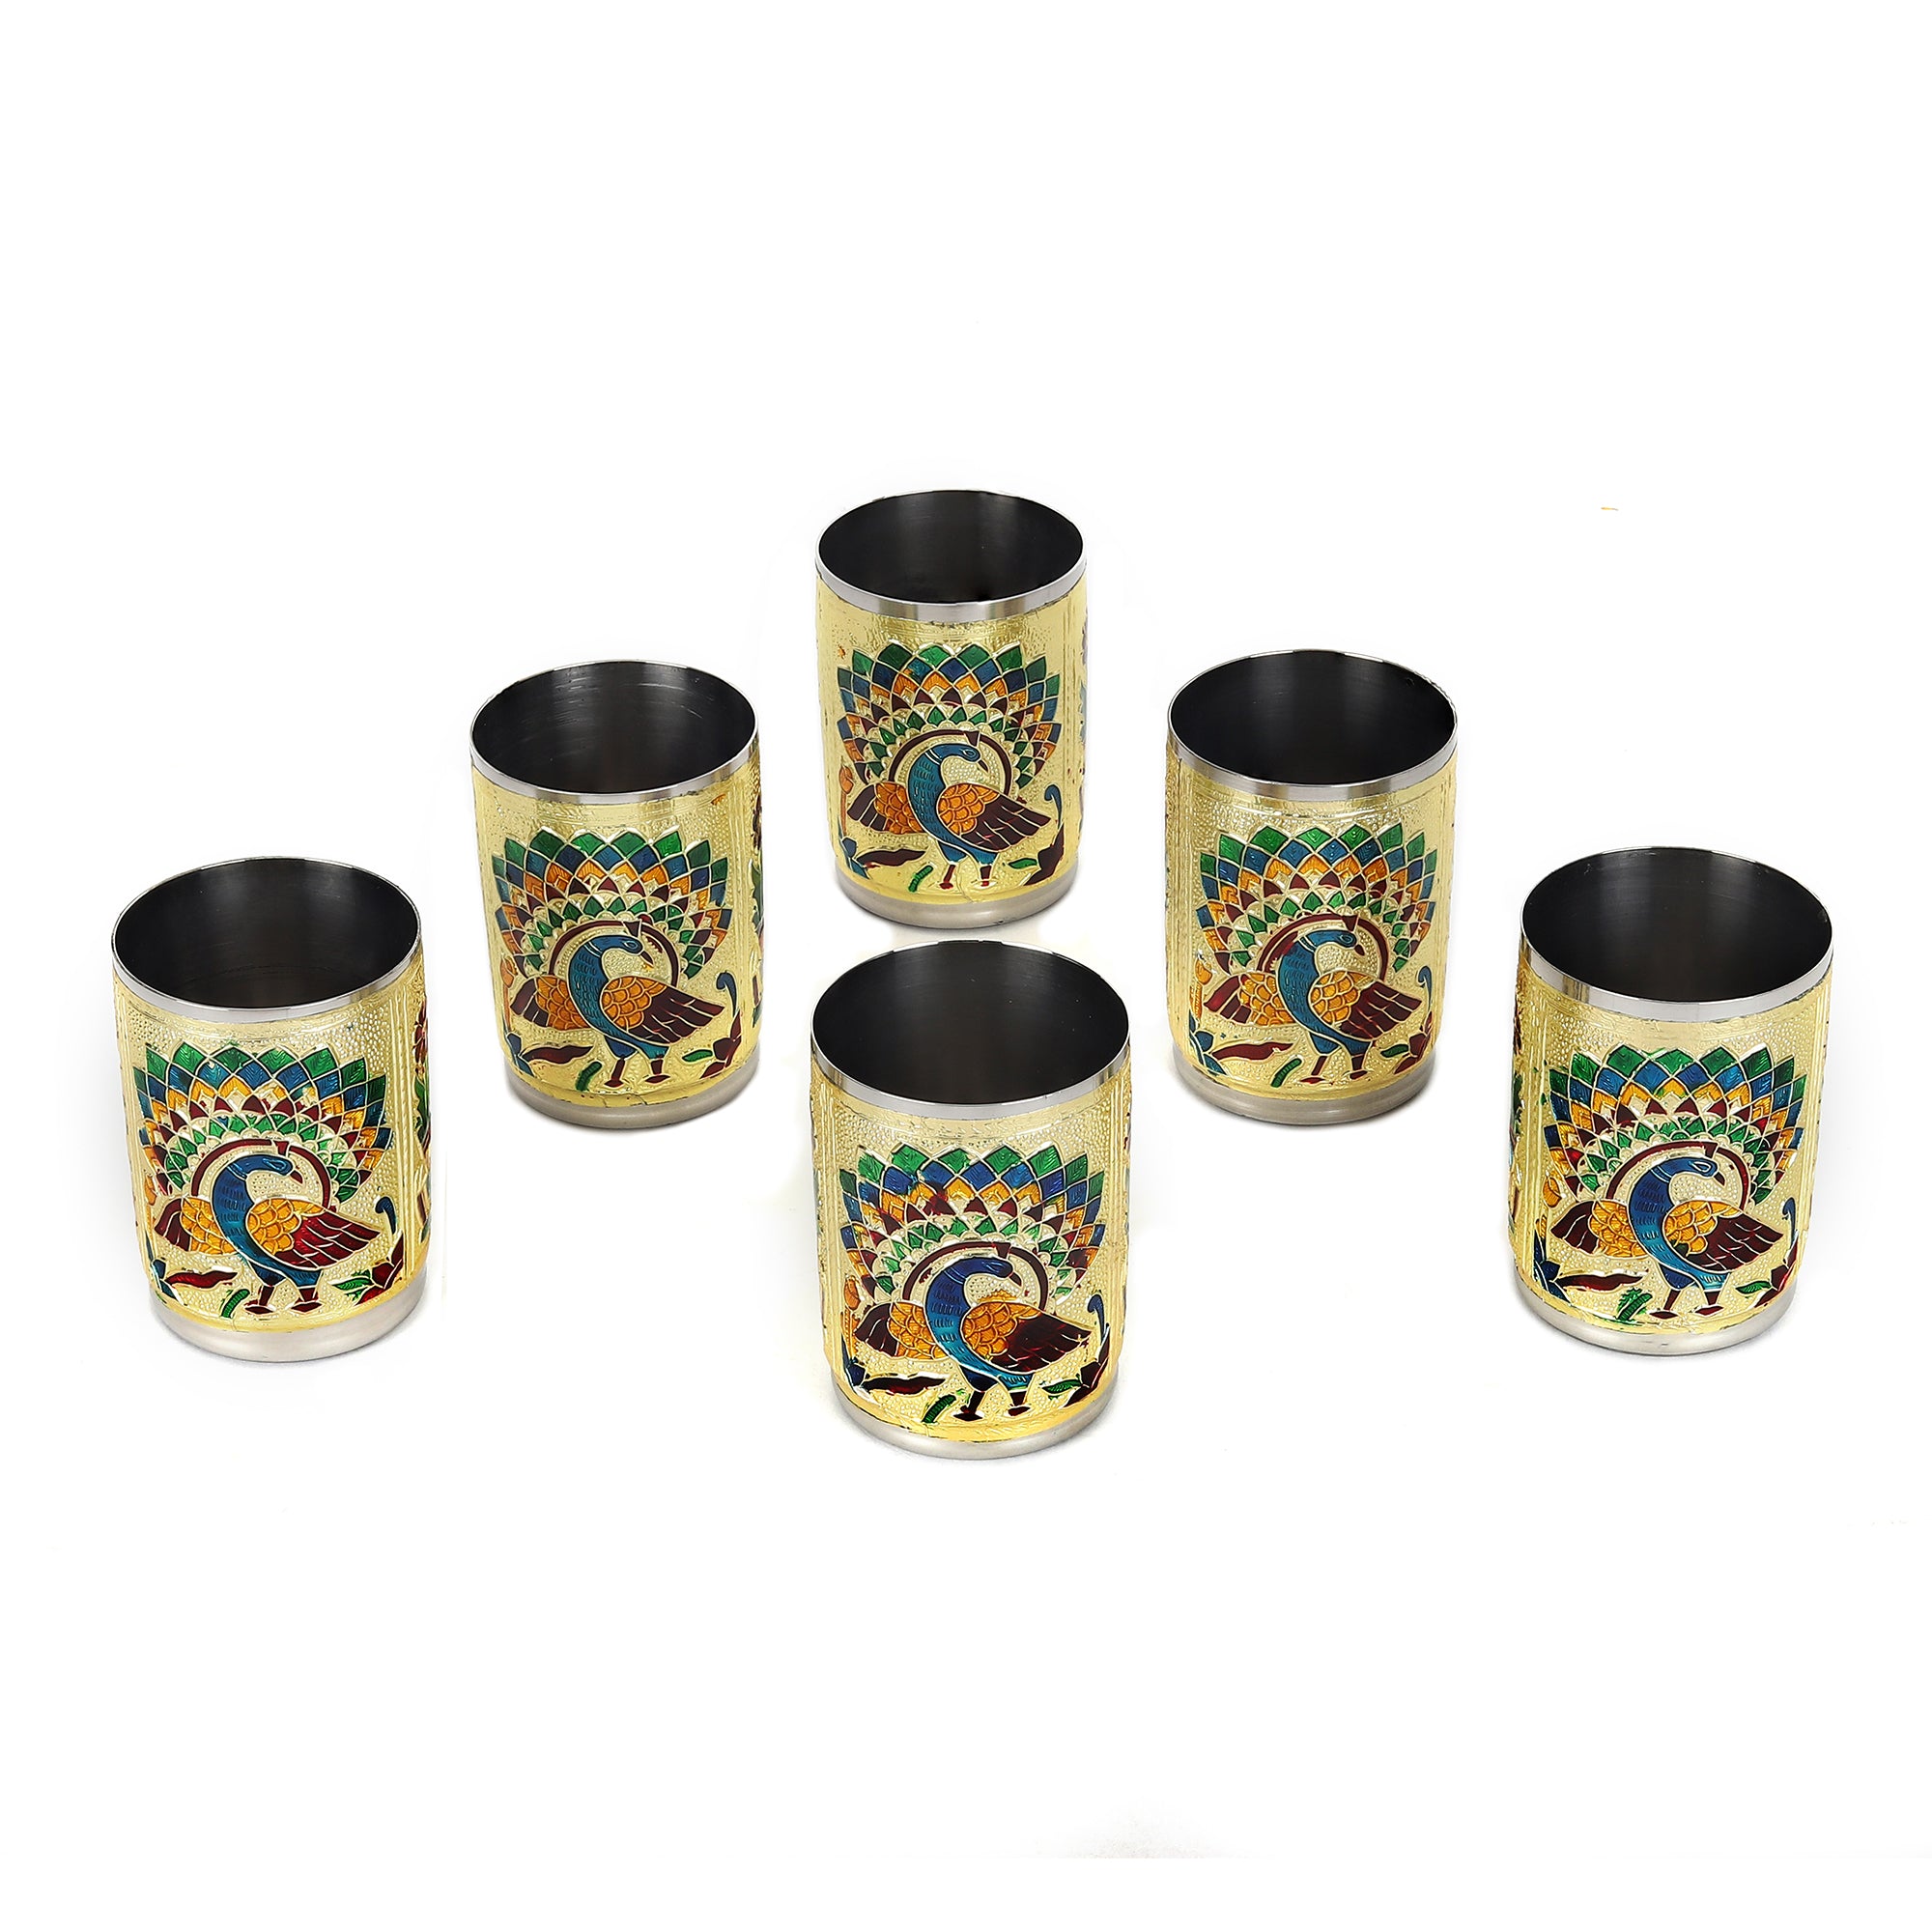 Peacock-Designed Meenakari Work Serving Tray with 6 Matching Glasses